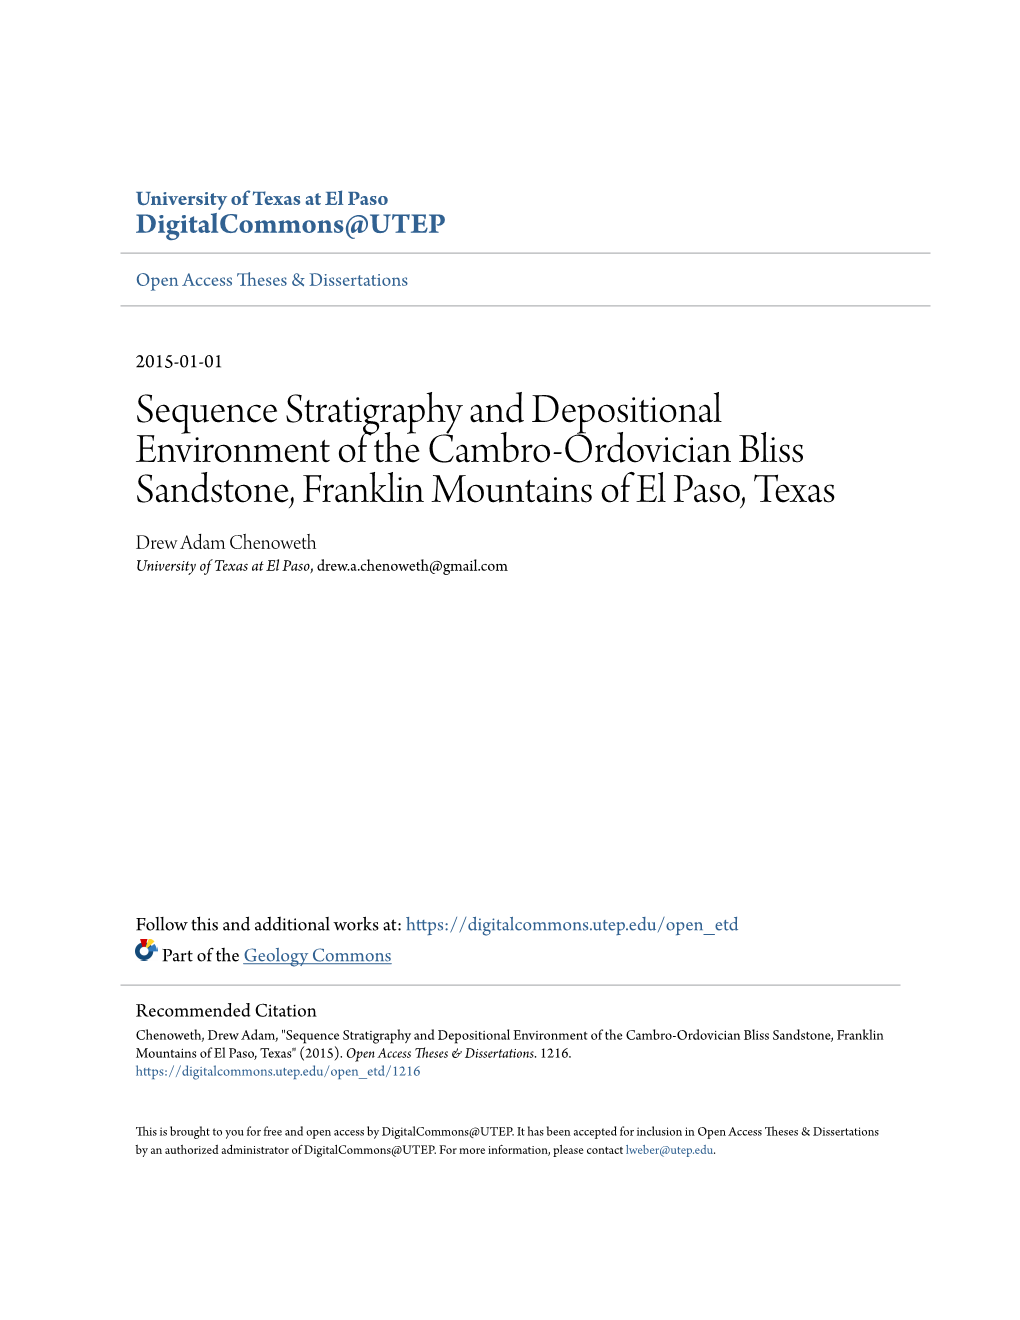 Sequence Stratigraphy and Depositional Environment of The